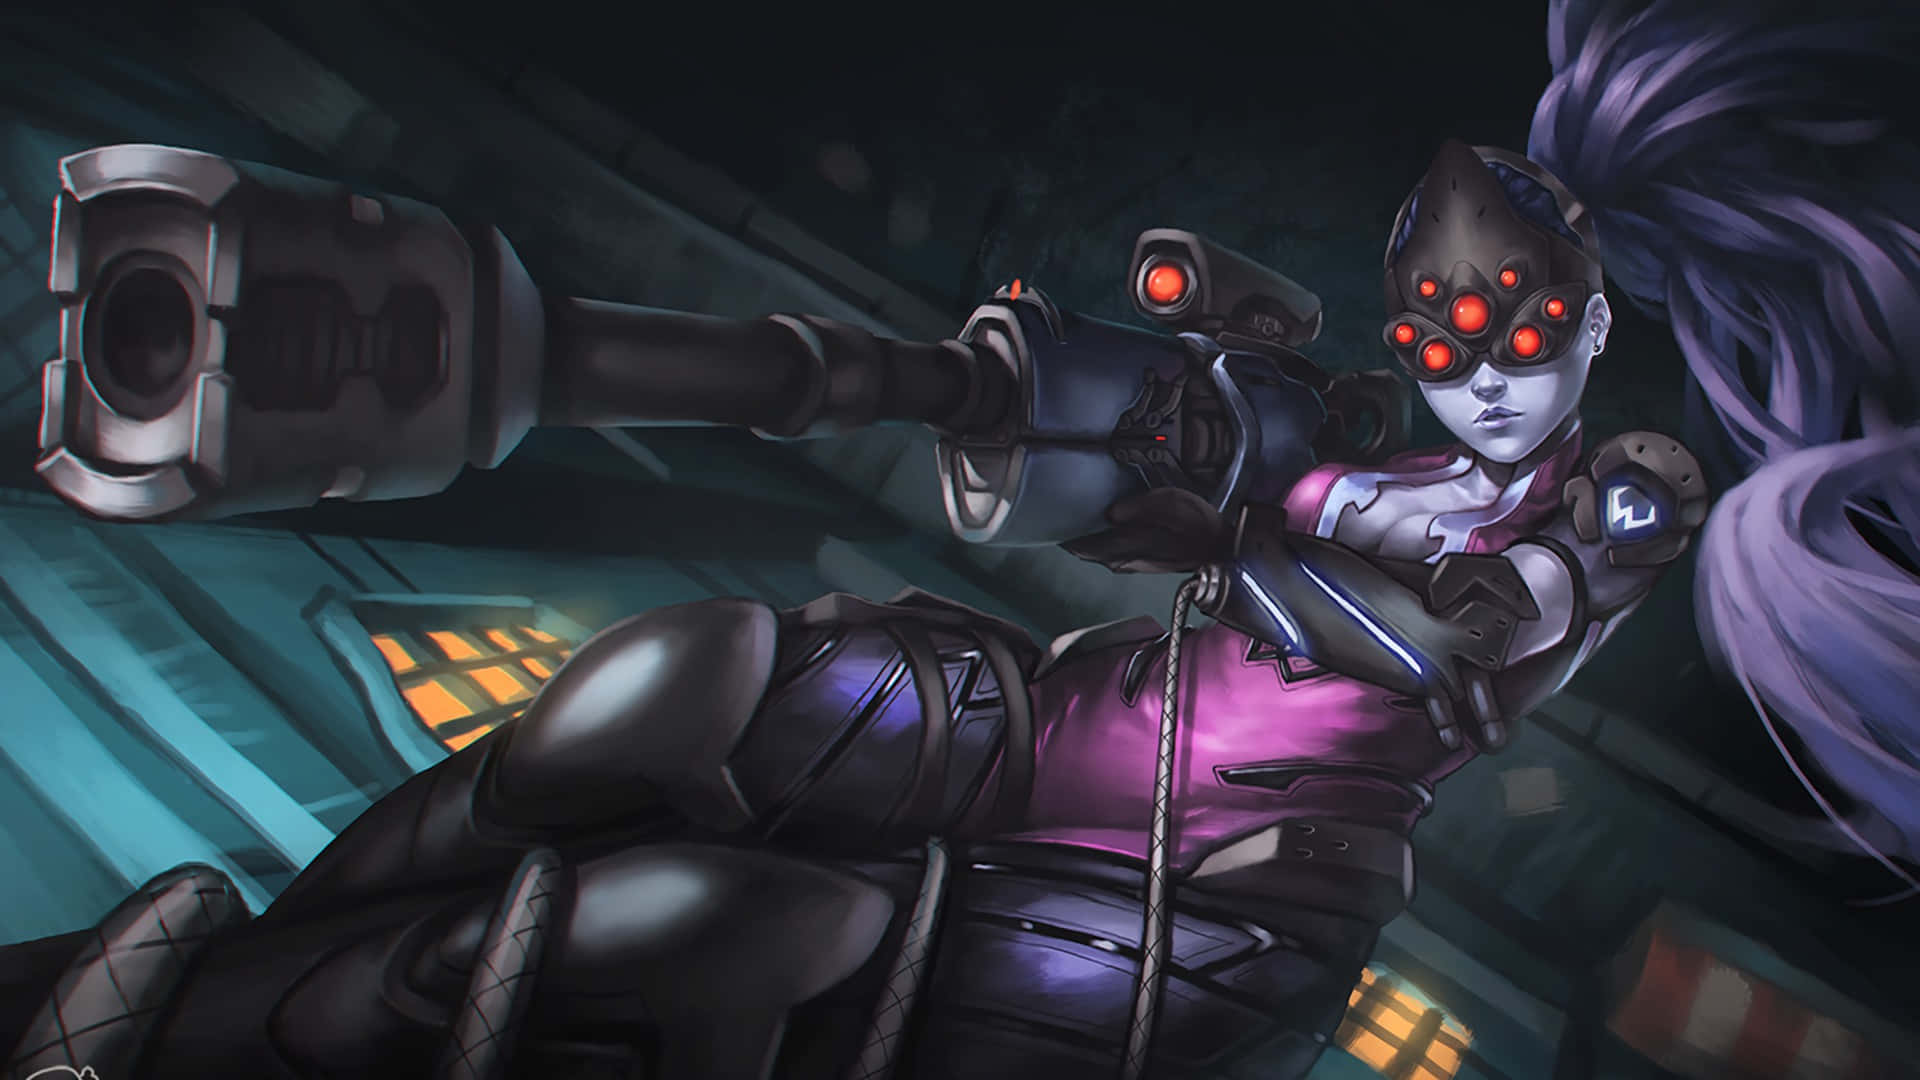 Aiming for Victory - Overwatch Widowmaker Wallpaper